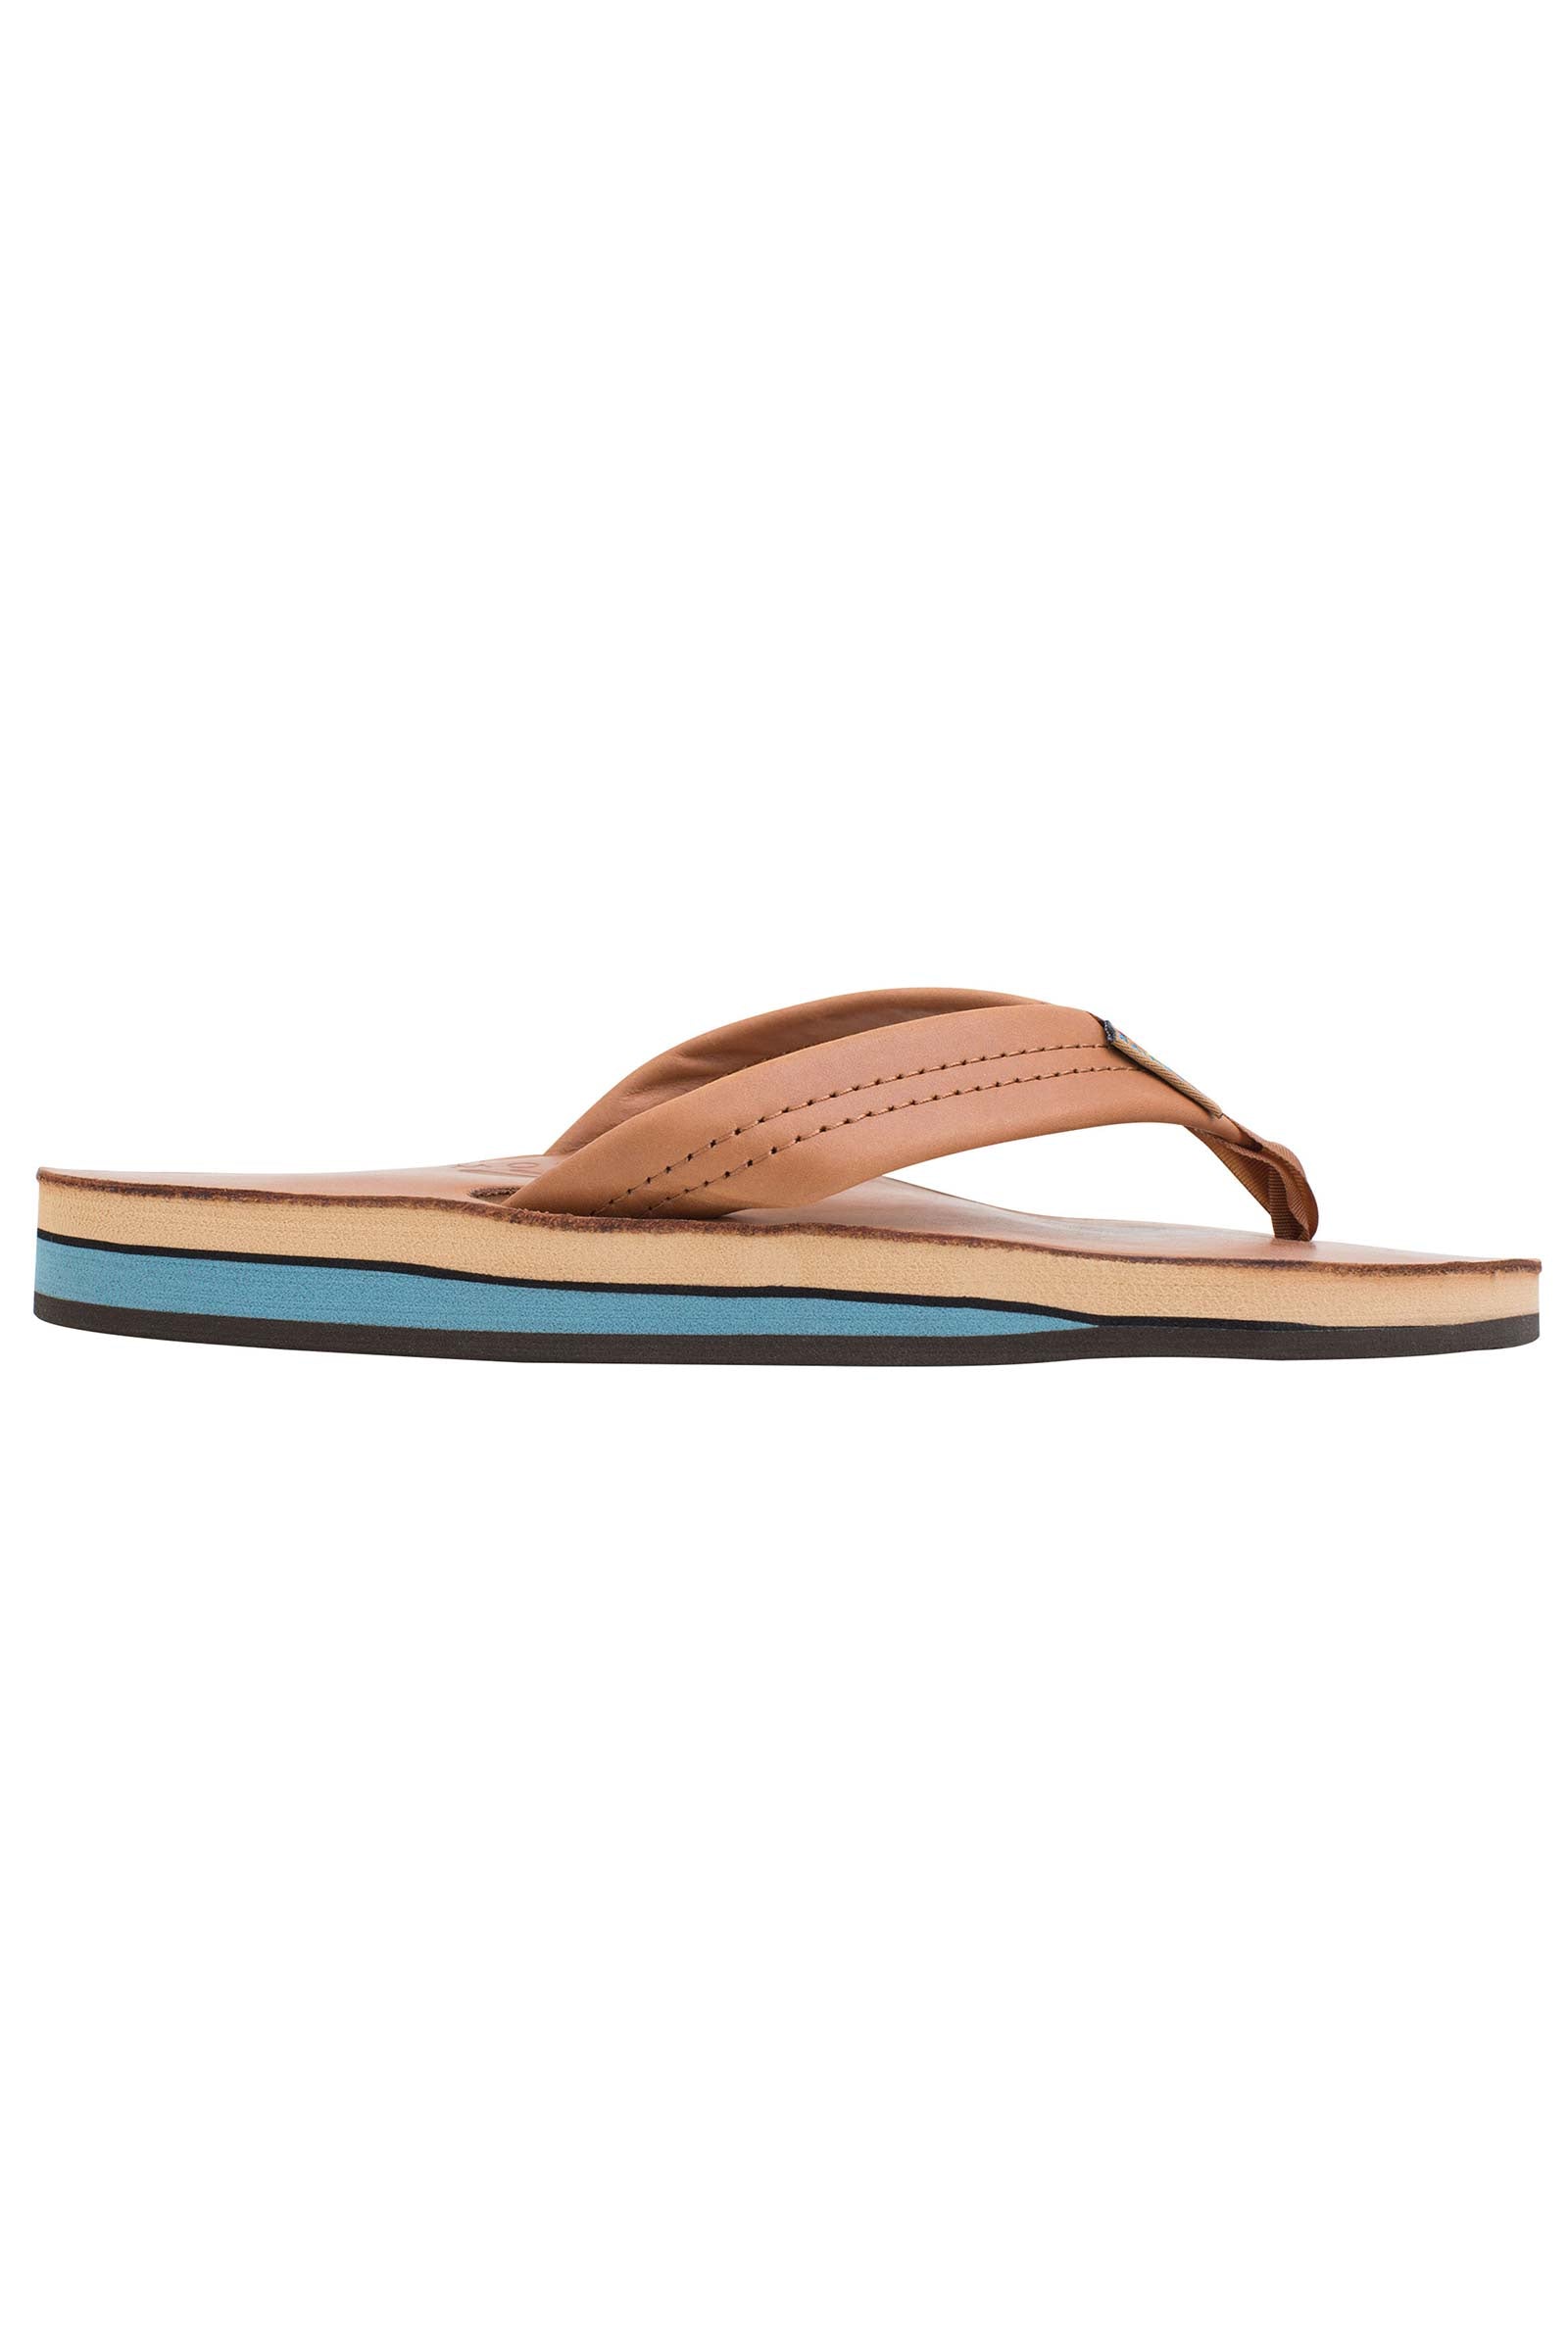 Mens Rainbow Sandals Classic Double Tan & Brown - Hope Outfitters